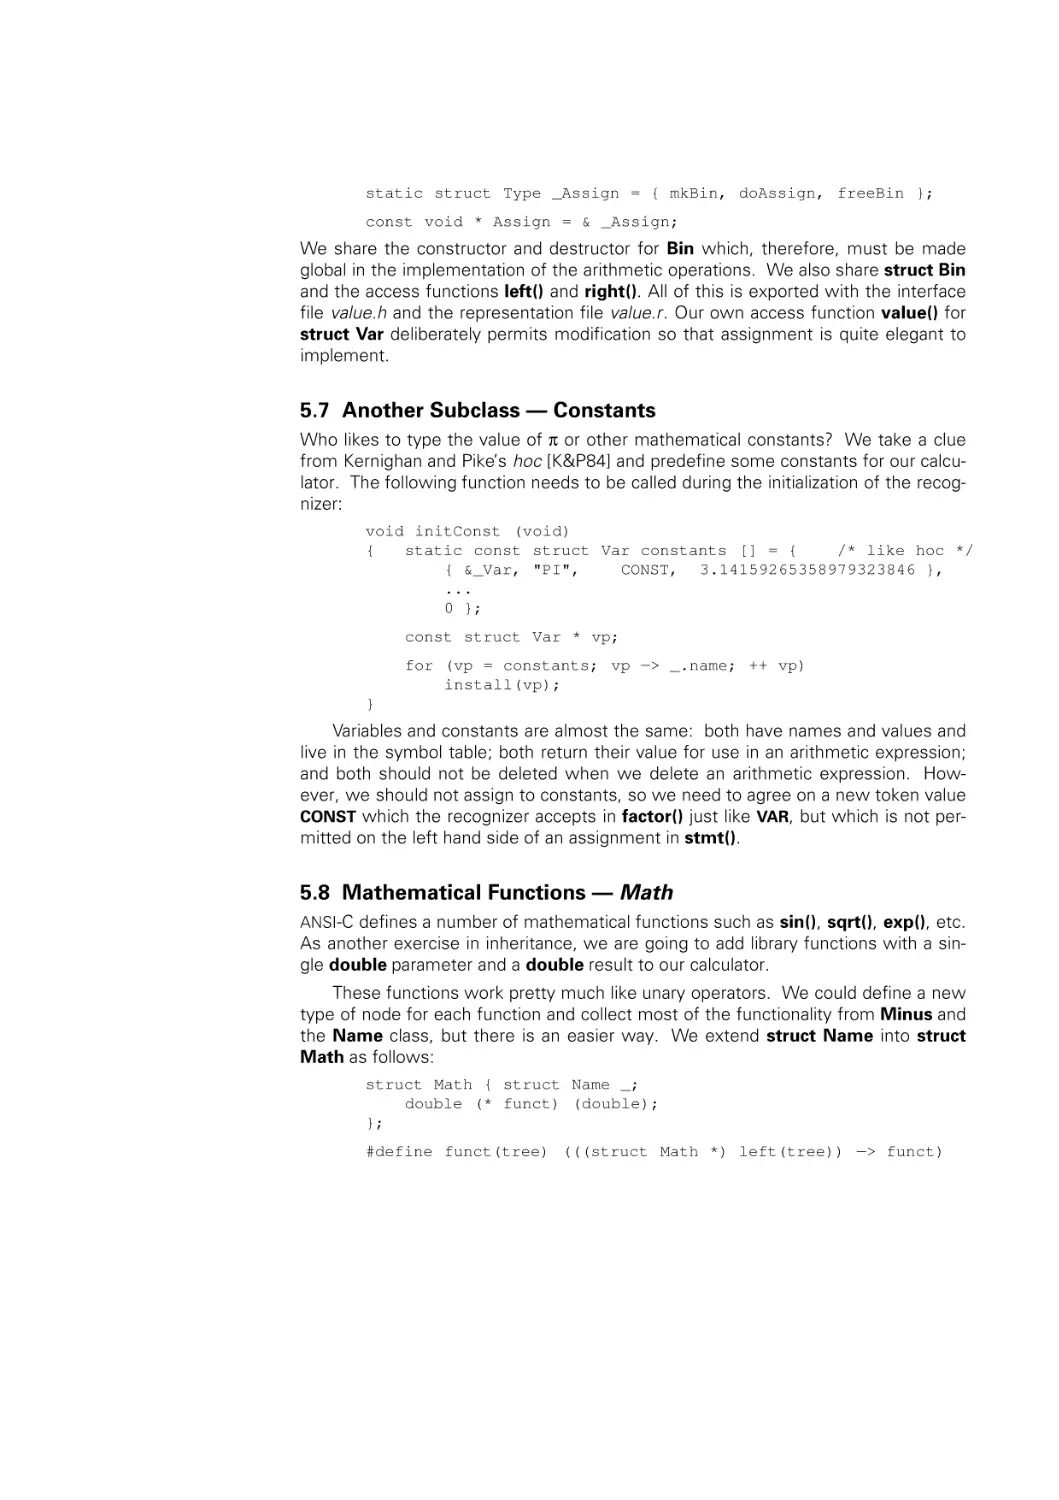 Another Subclass - Constants
Mathematical Functions - Math